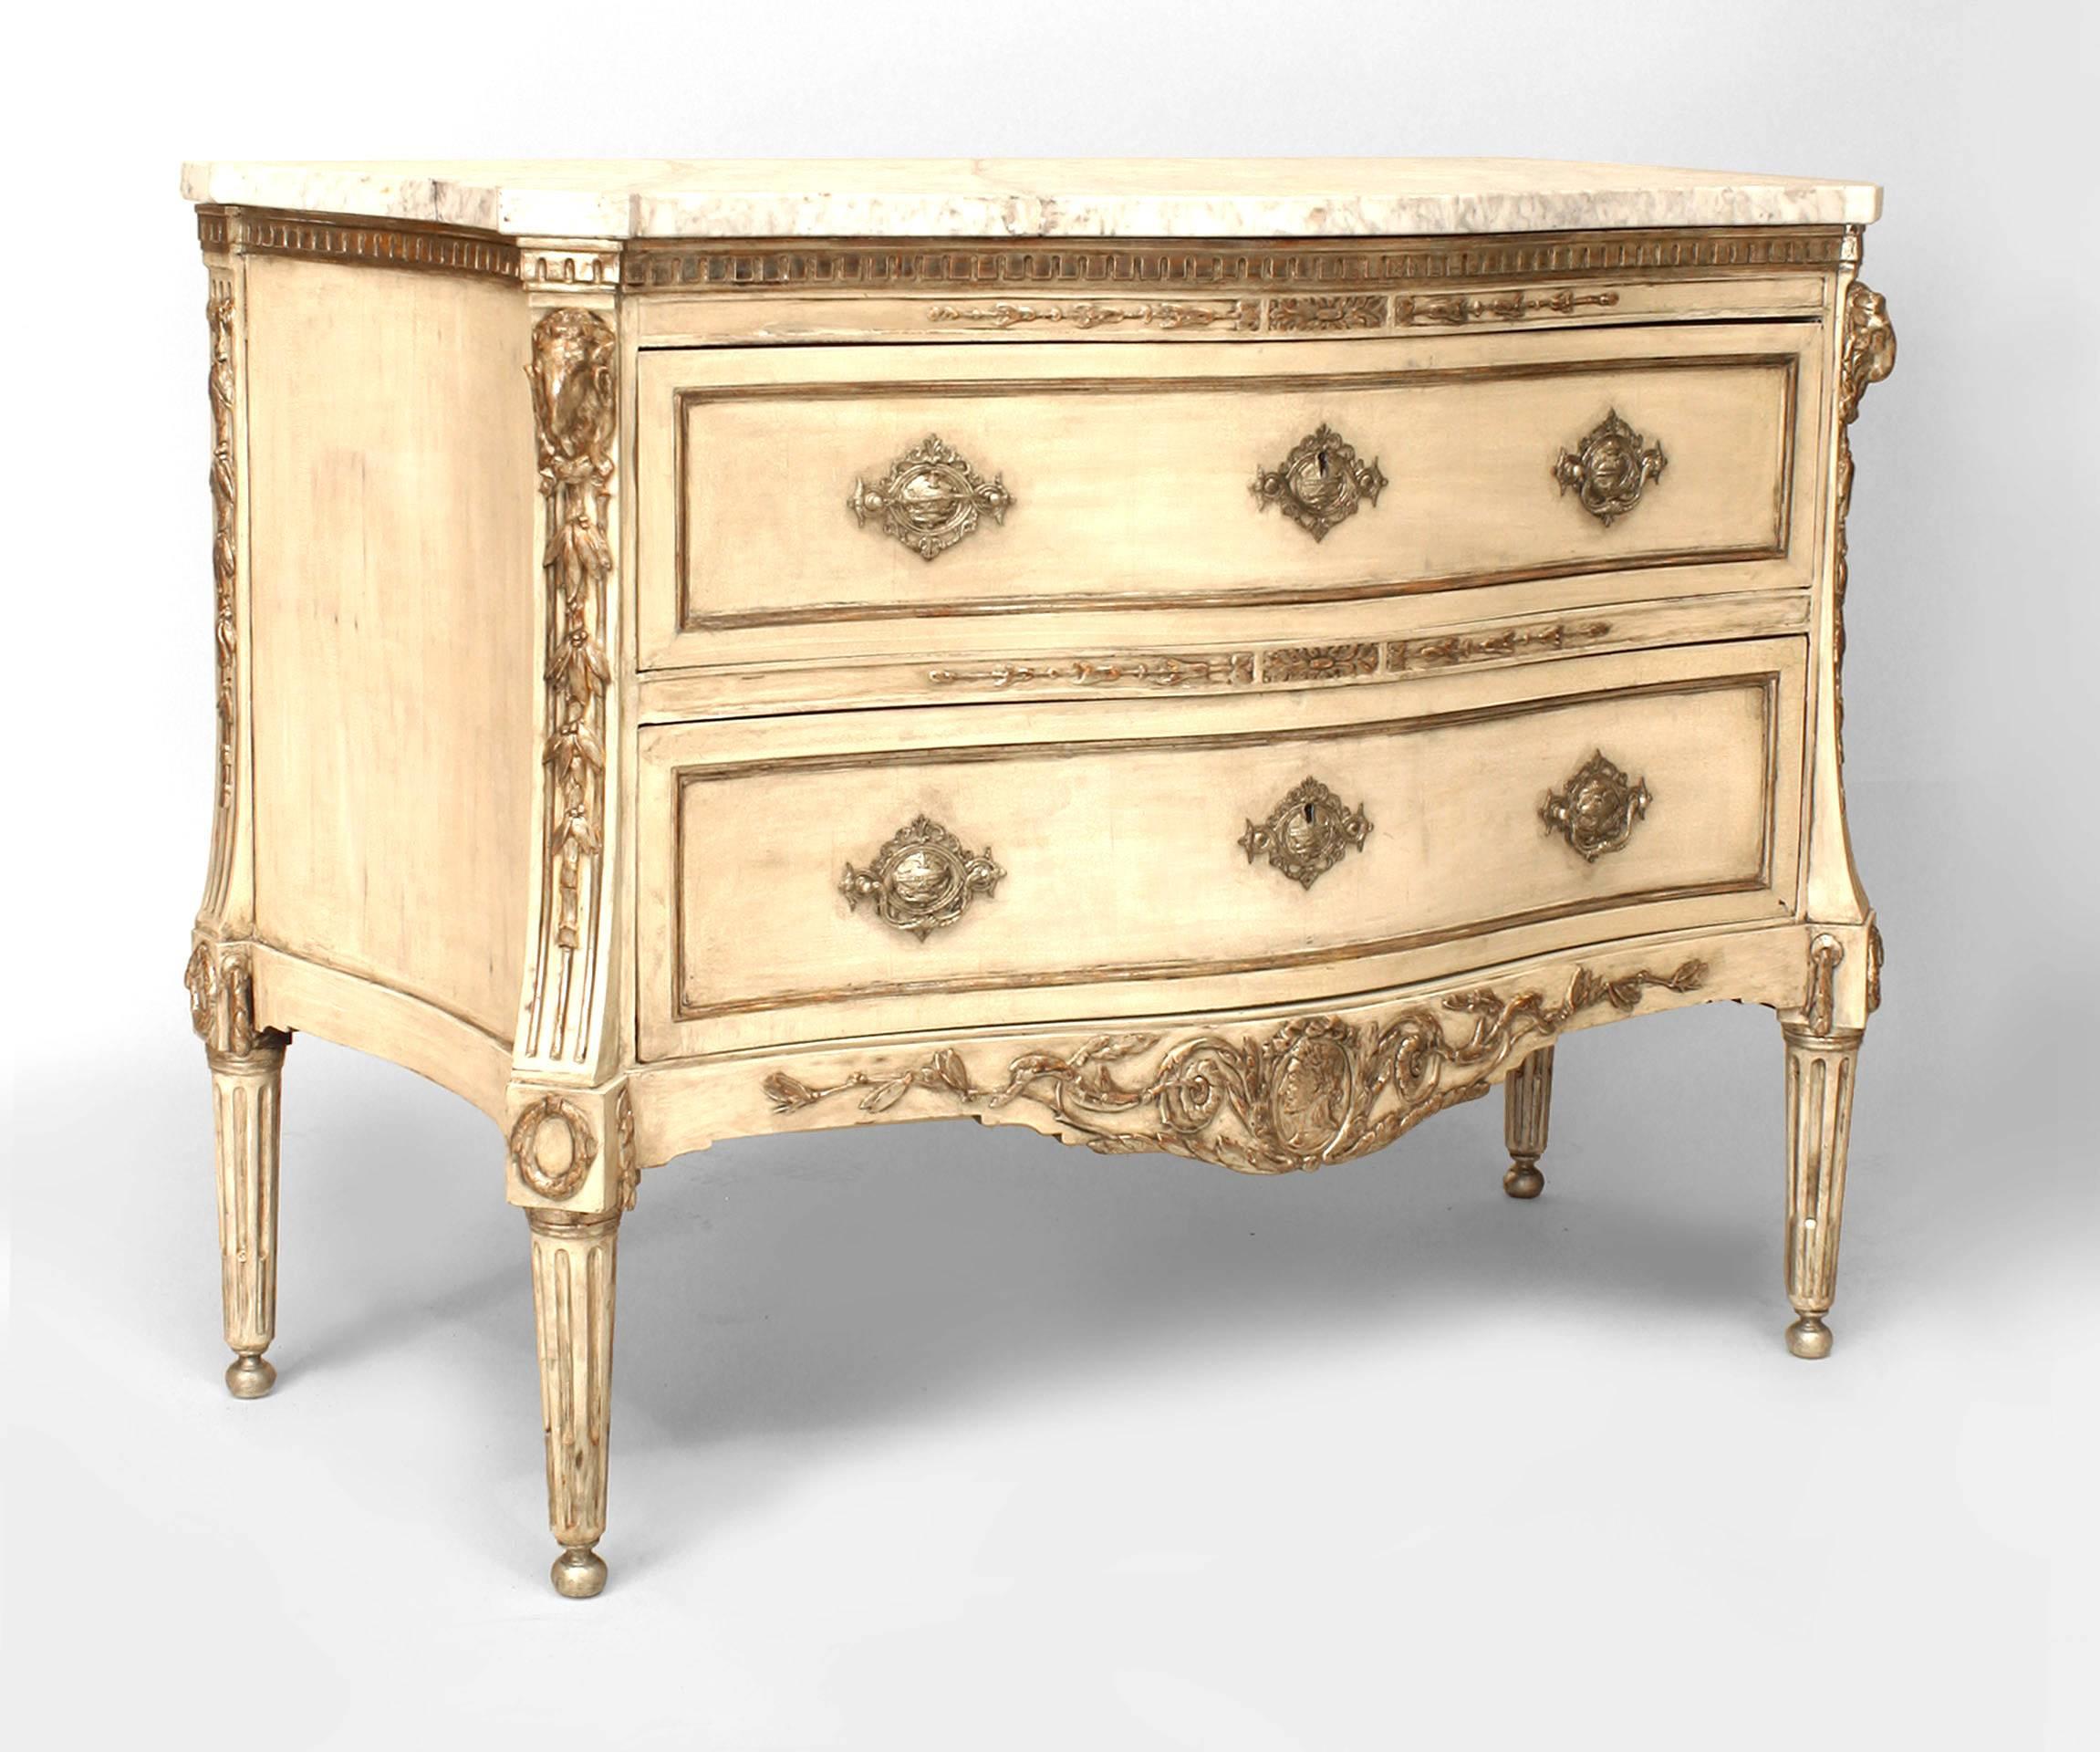 Continental Neoclassic (early 19th Century) painted and silver gilt commode with a serpentine Carrara marble top over two drawers flanked by molded edges with rams heads and bell flowers supported by fluted tapering legs.
